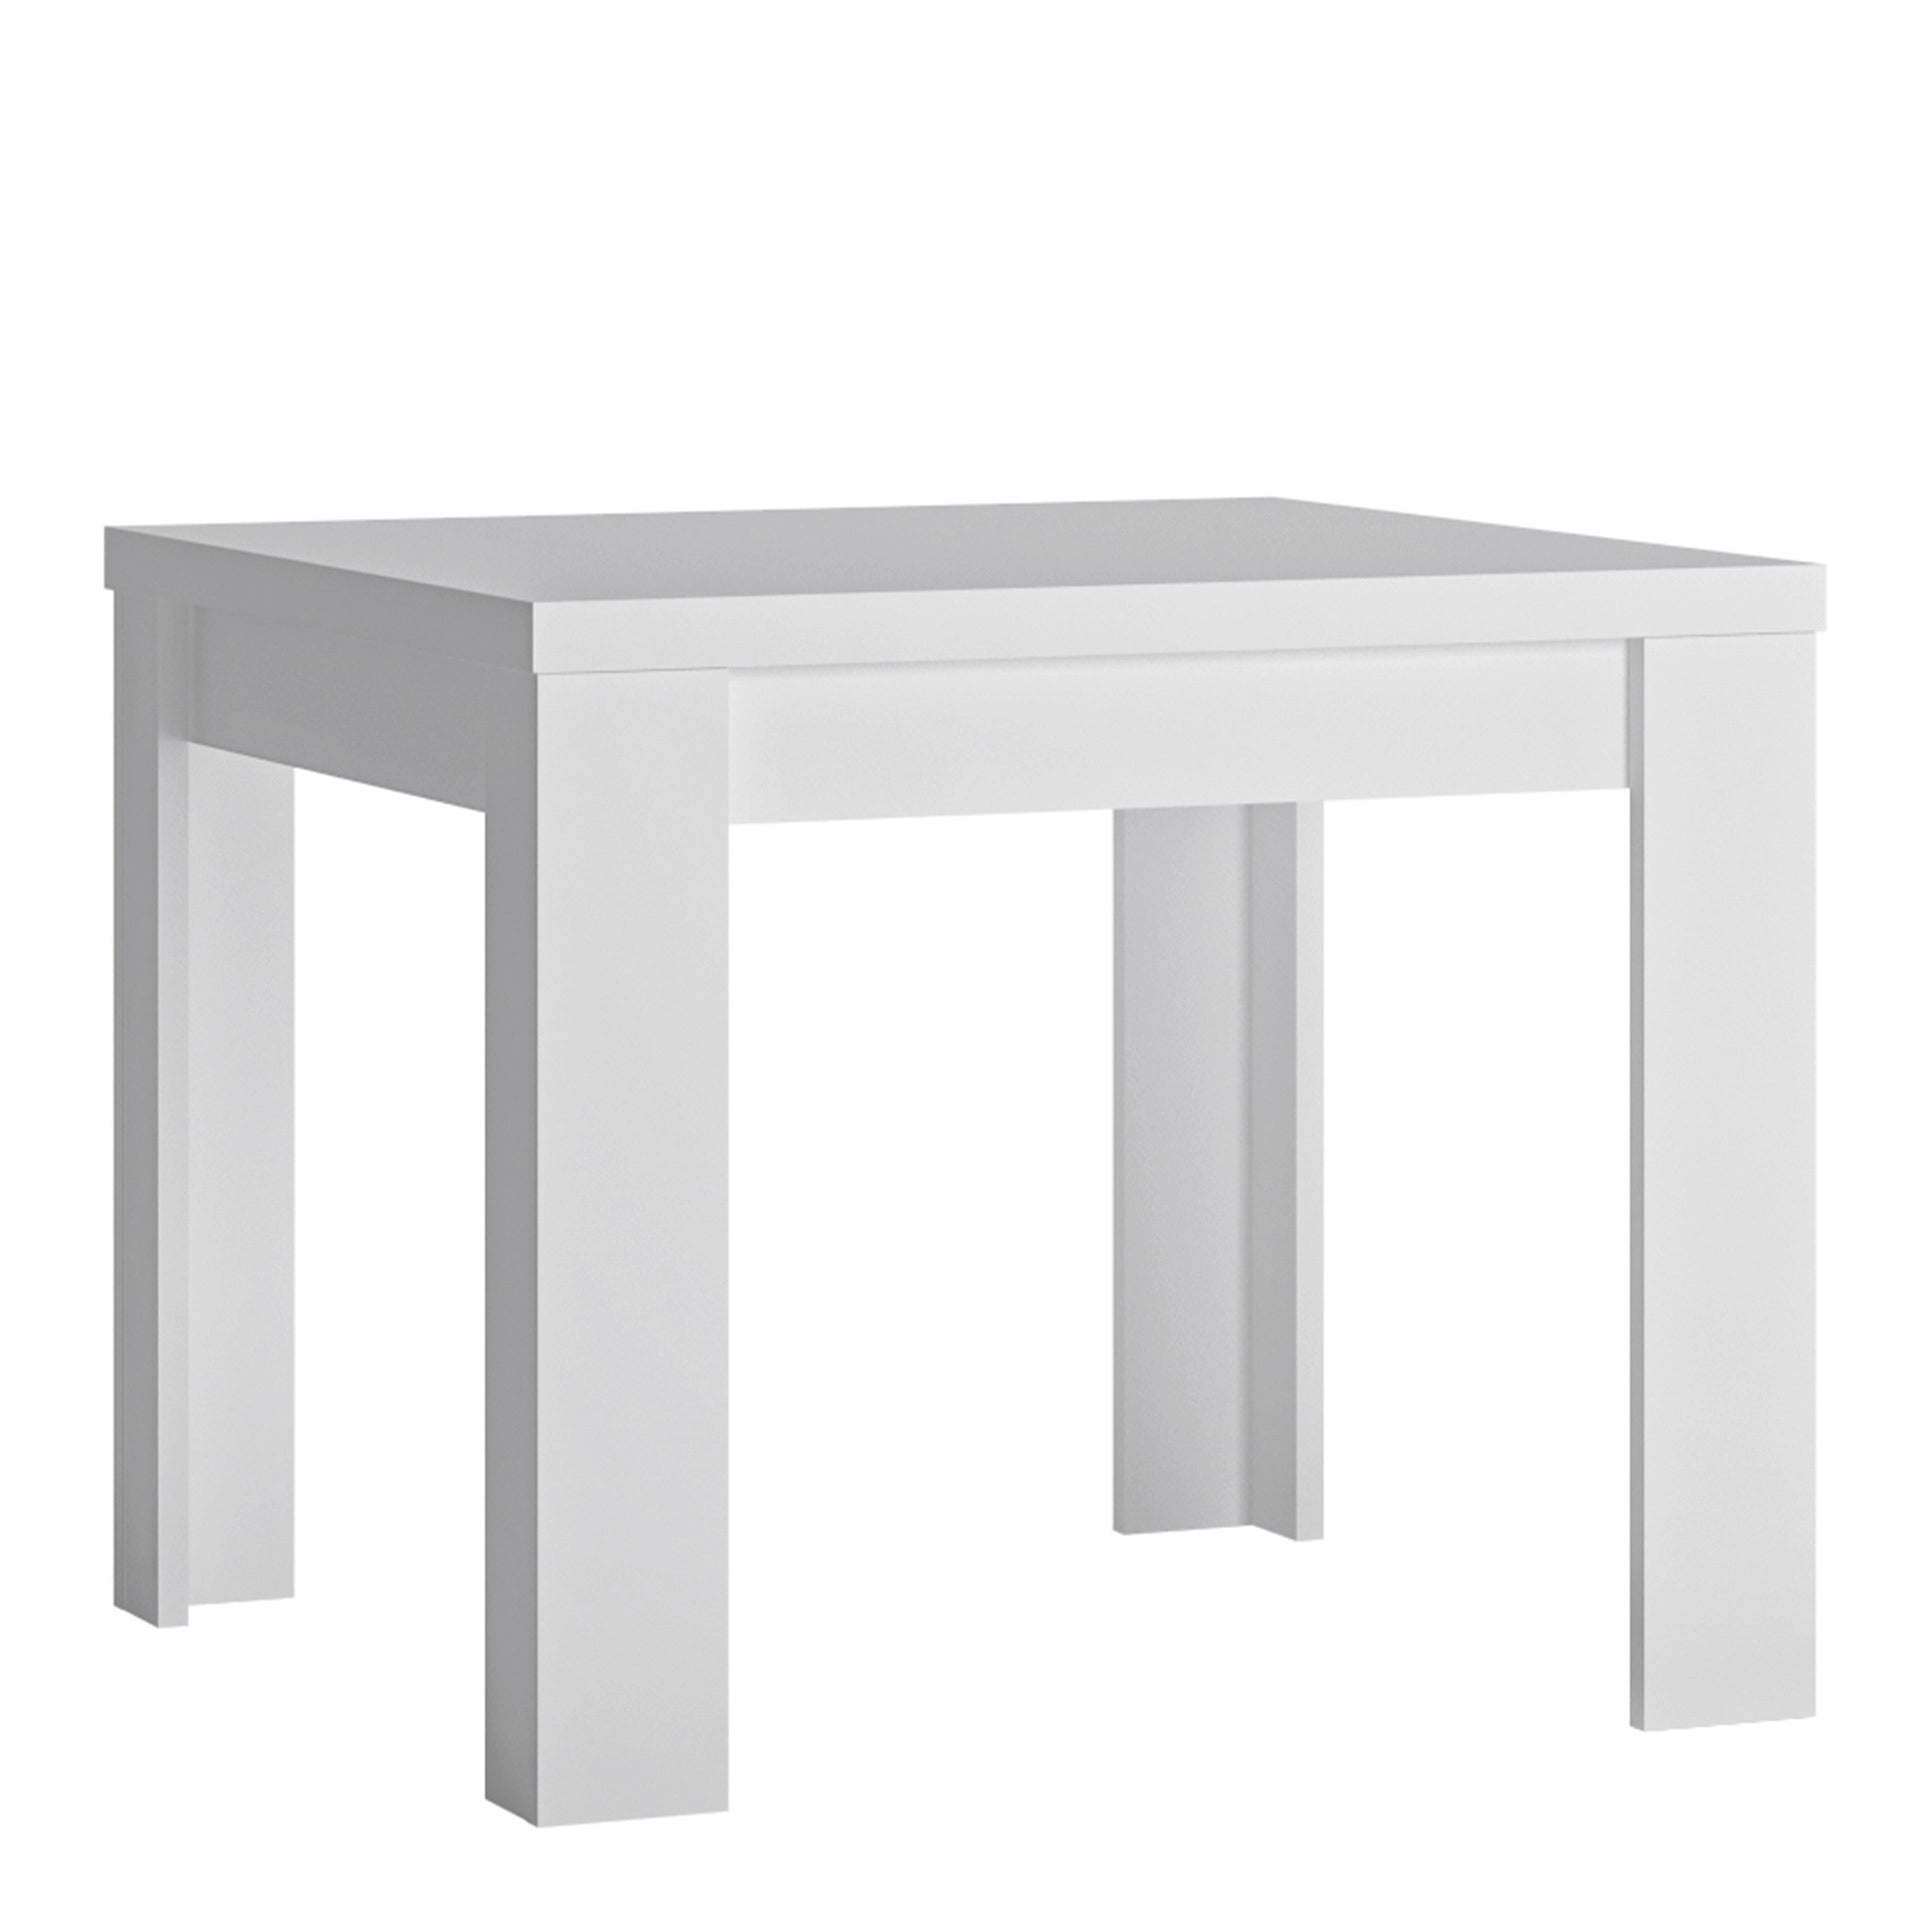 Furniture To Go Lyon Small Extending Dining Table 90/180cm in White & High Gloss